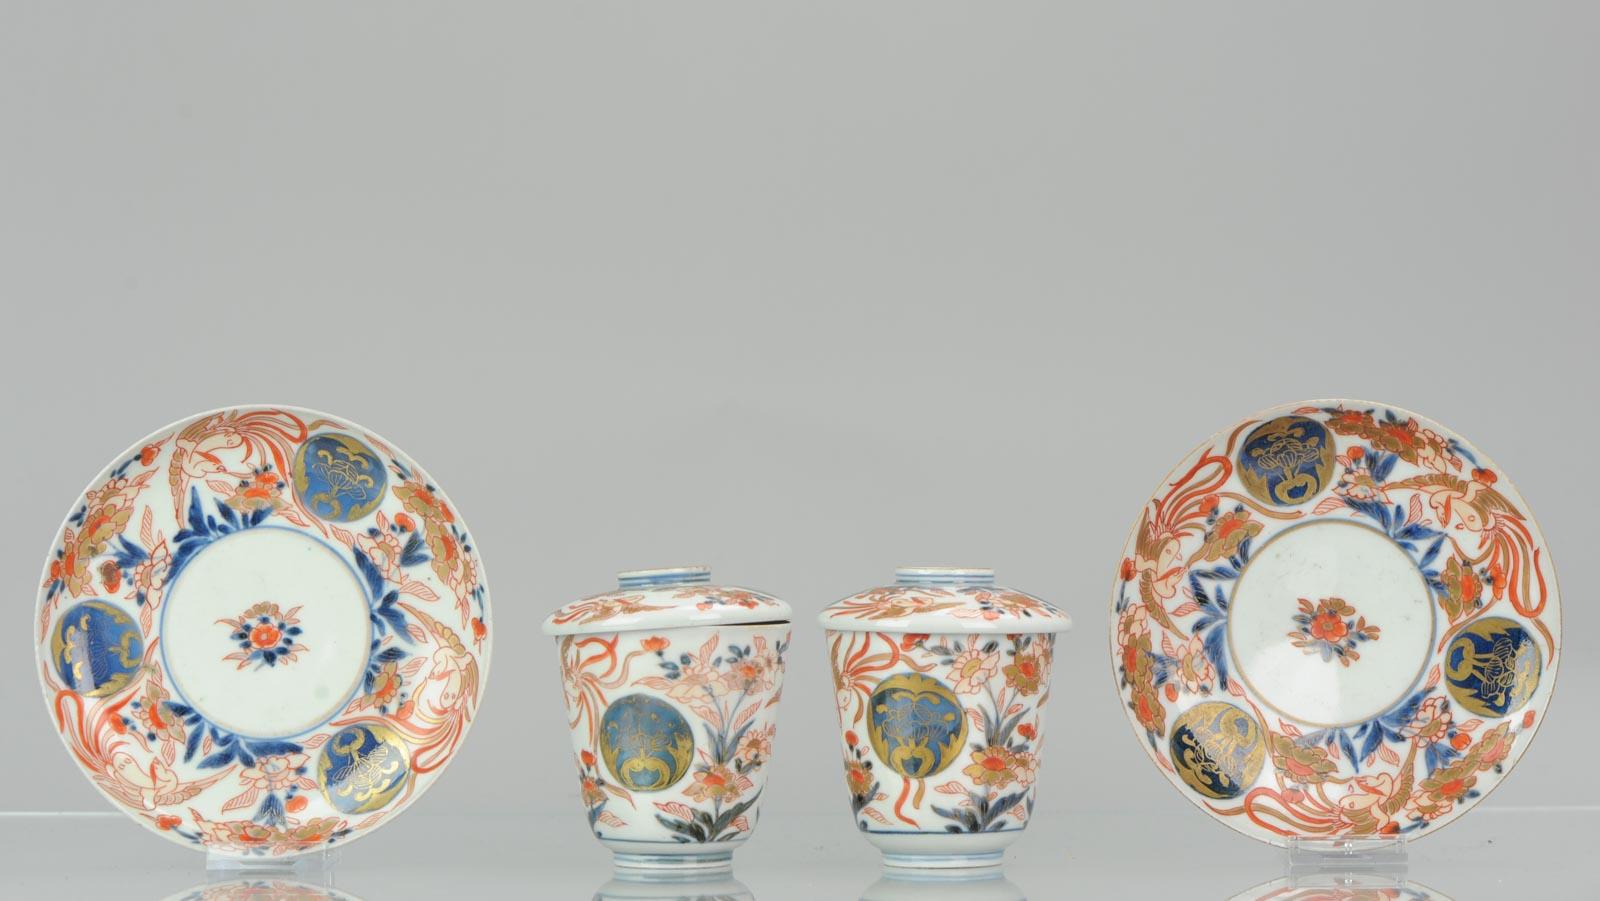 Lovely and complete pair of sets from the Edo period. Painted with paradise birds and flowers. The enamel and gilt are close to untouched which is really nice, 18th century.


Condition
Cups perfect, lid 1 perfect lid 2 with a bumspot line